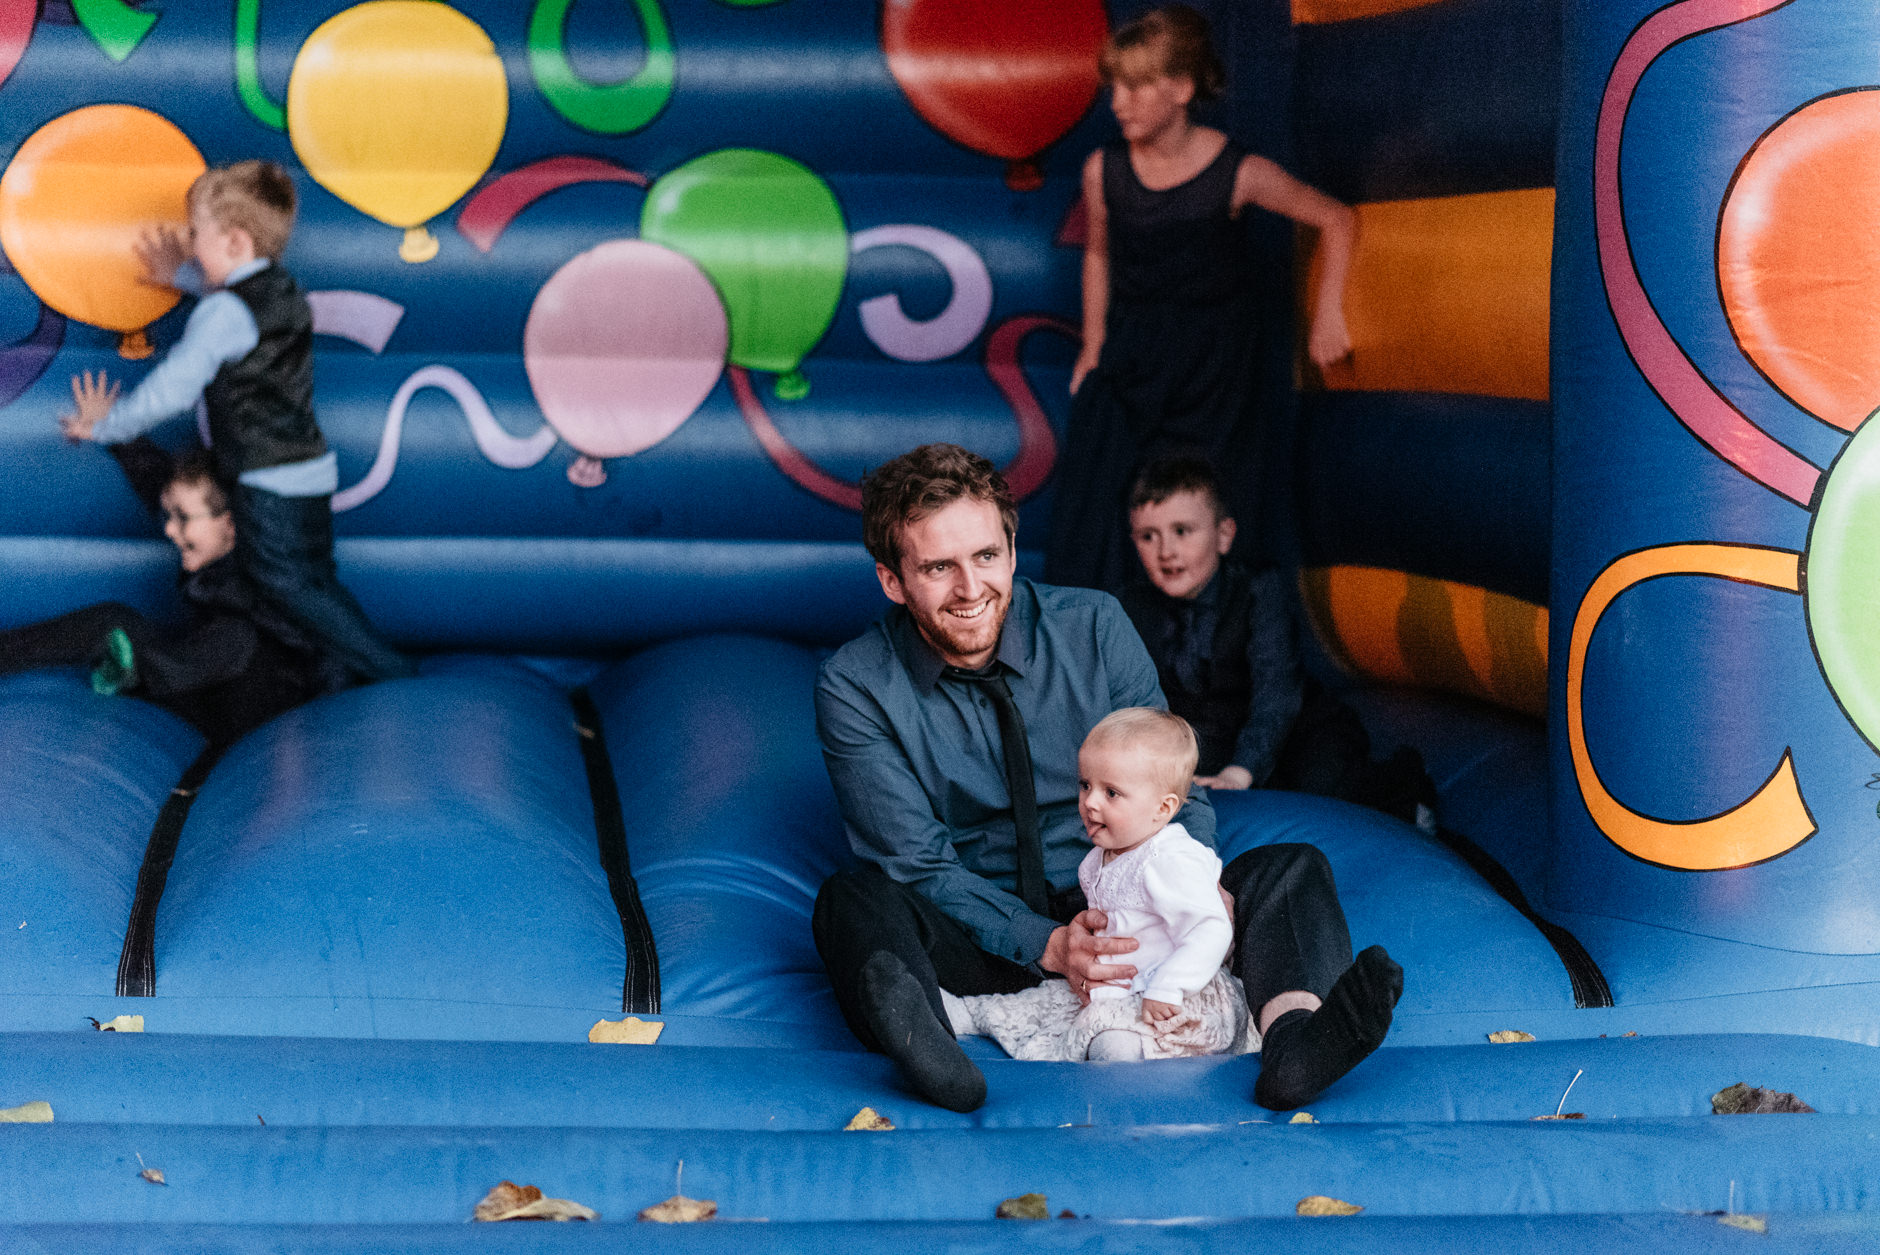 A guest on the bouncy castle with his child